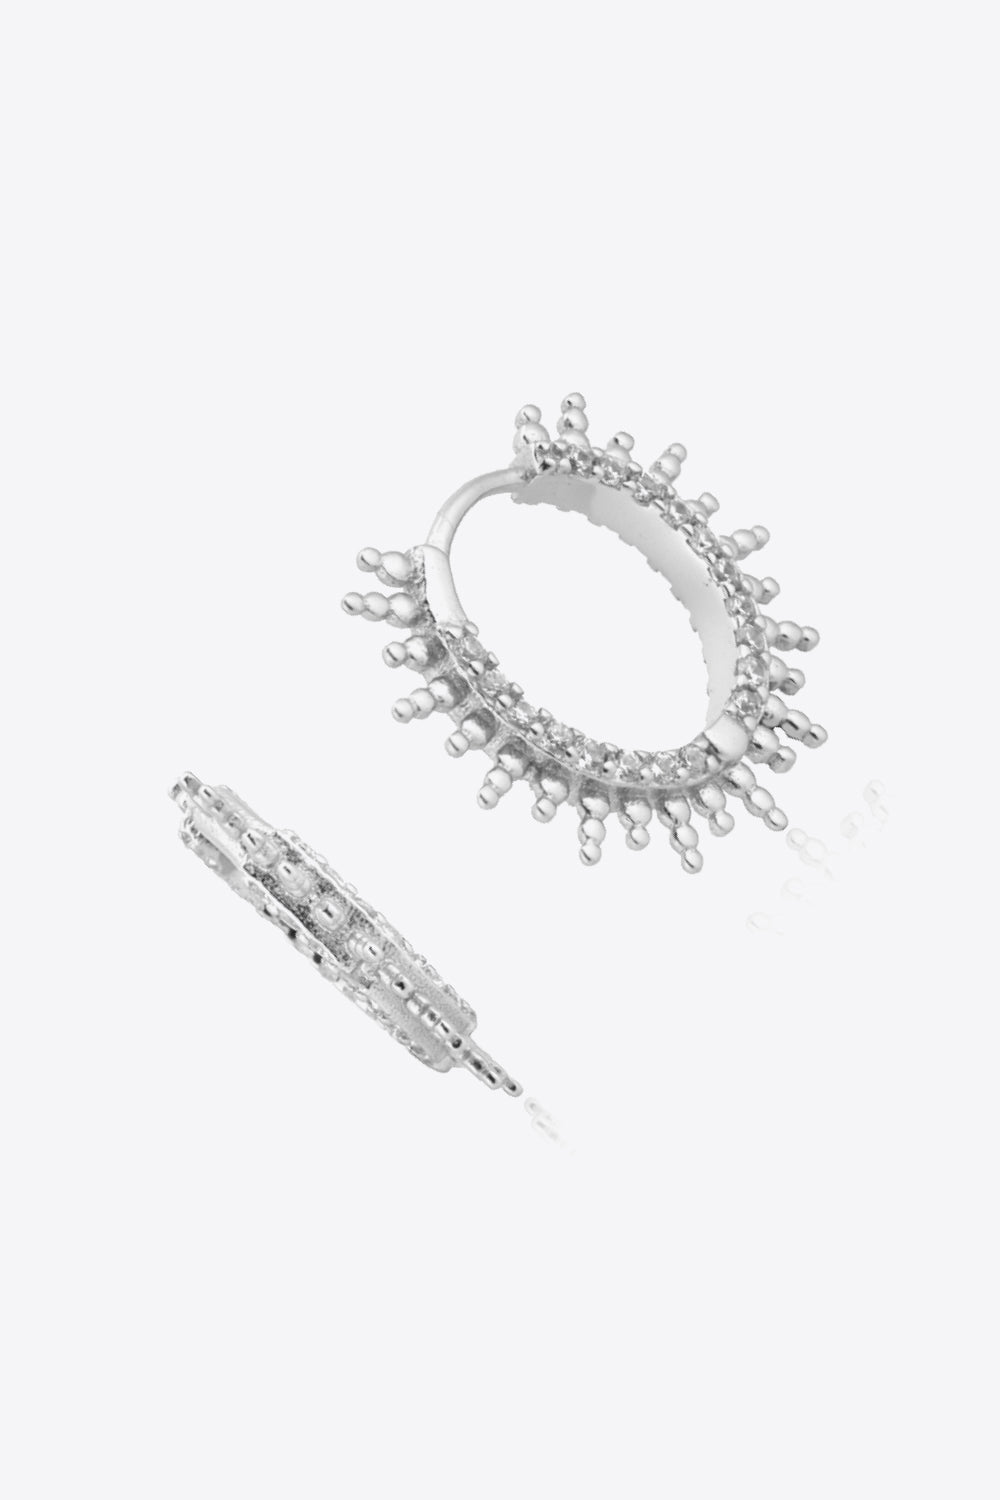 Sparkling spiked Sterling silver Huggies